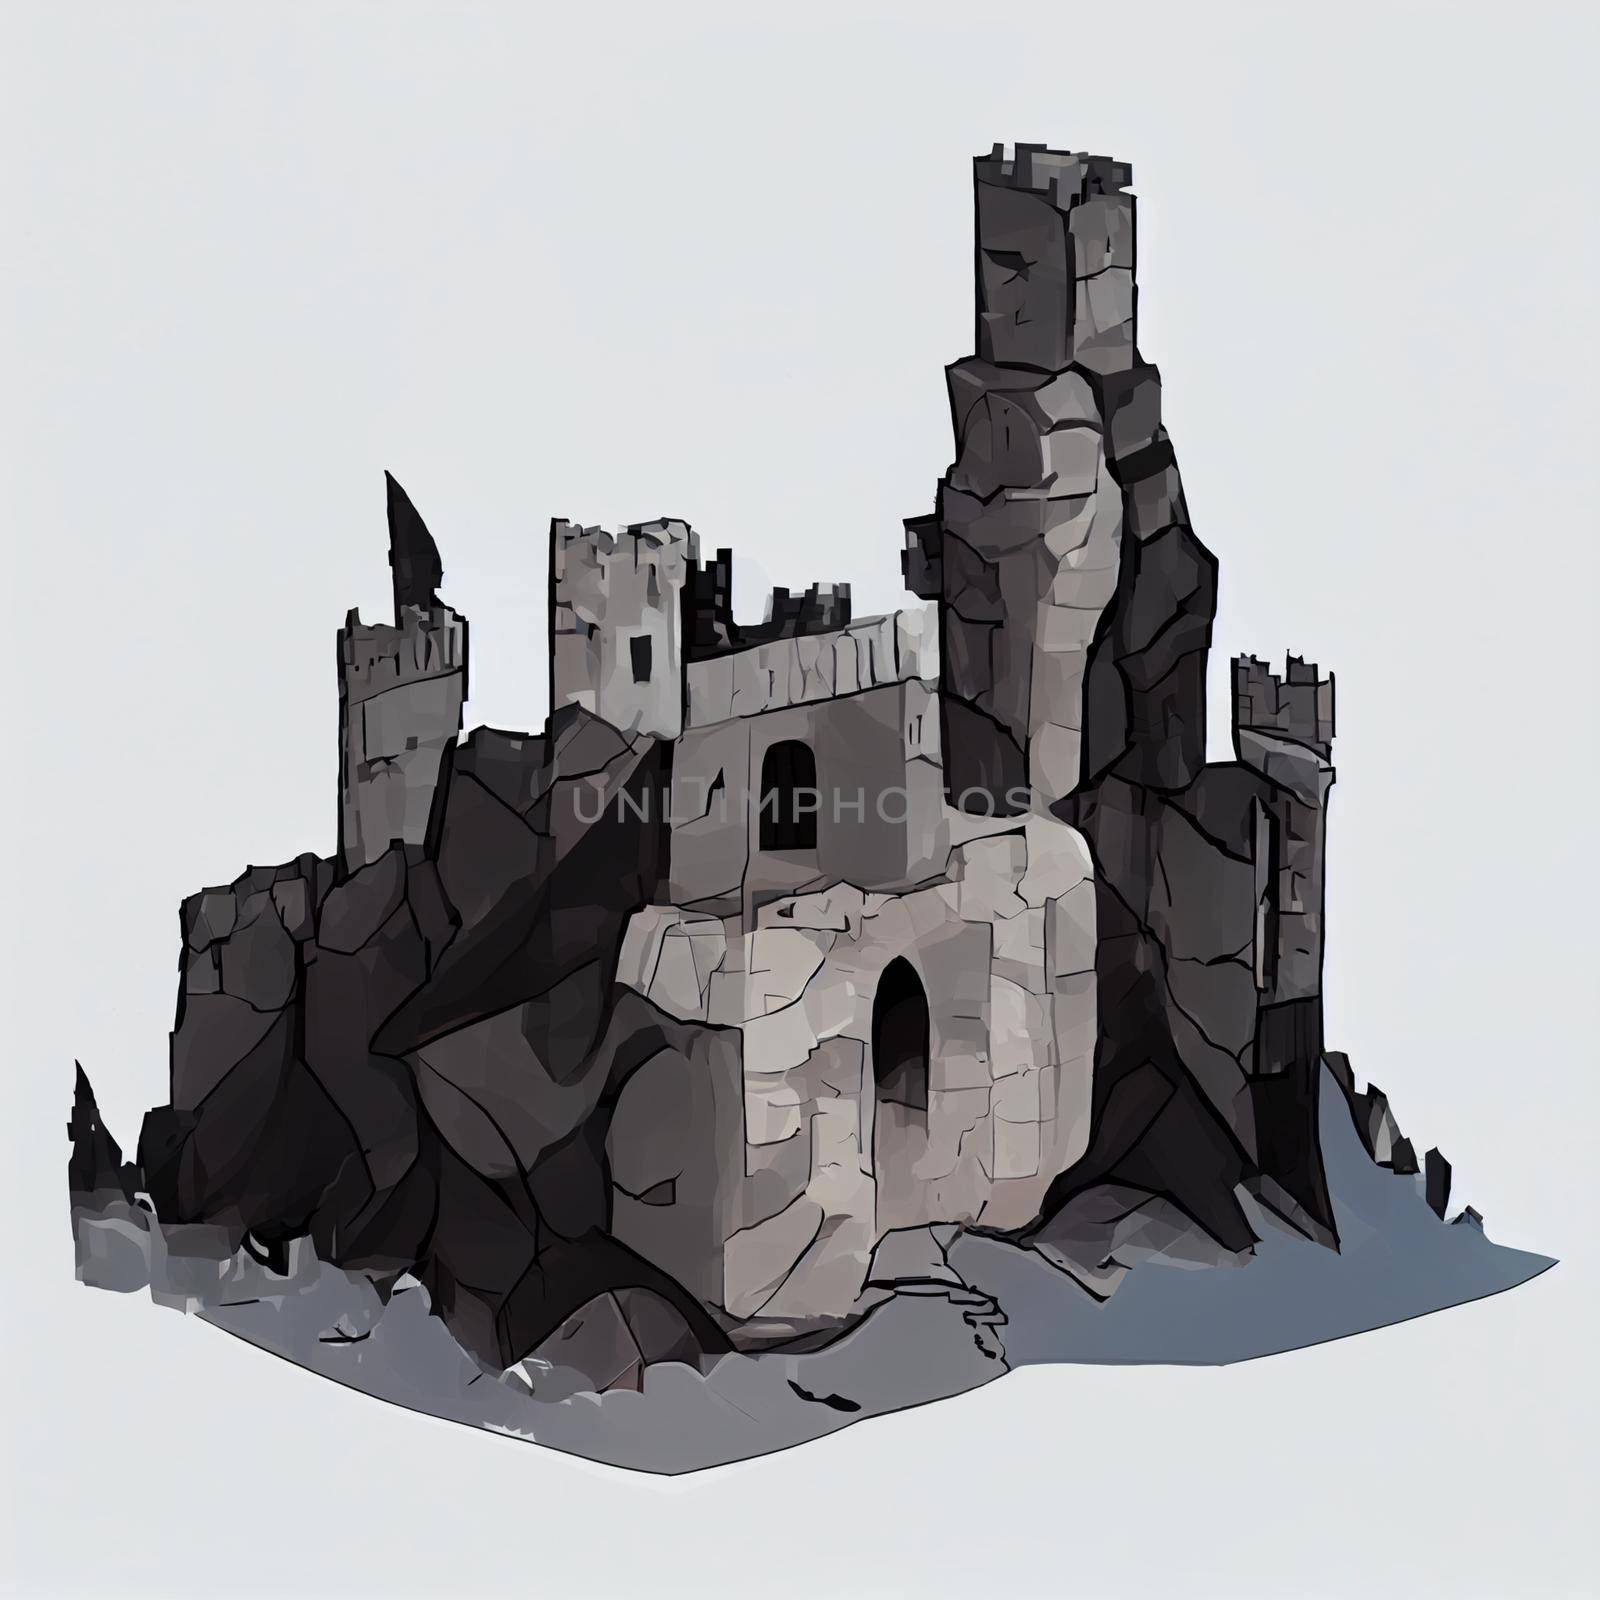 Illustration of the ruins of an ancient castle by NeuroSky